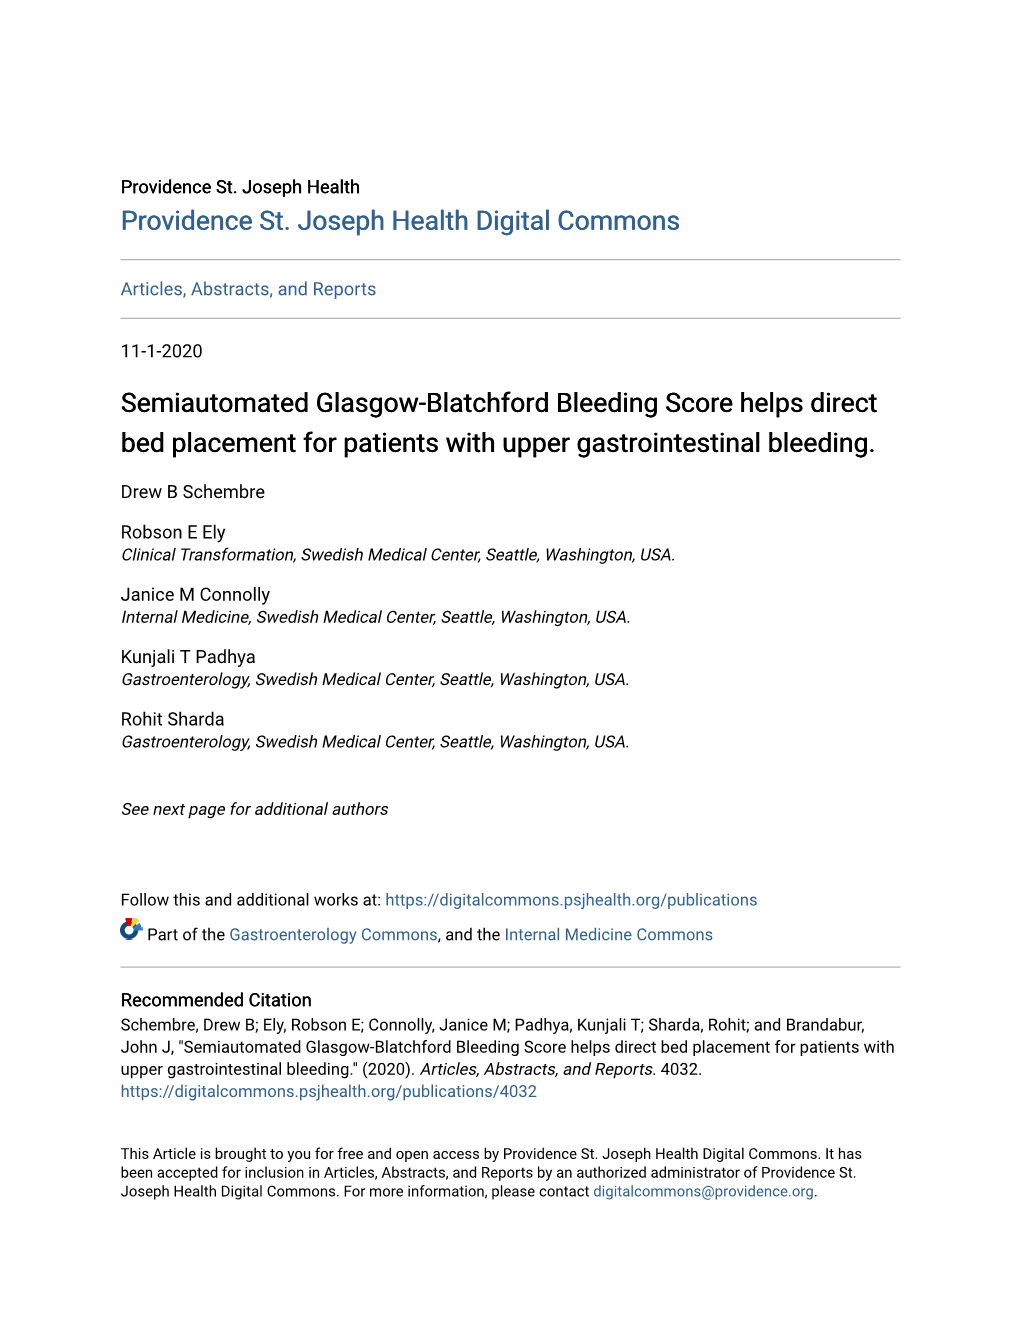 Semiautomated Glasgow-Blatchford Bleeding Score Helps Direct Bed Placement for Patients with Upper Gastrointestinal Bleeding